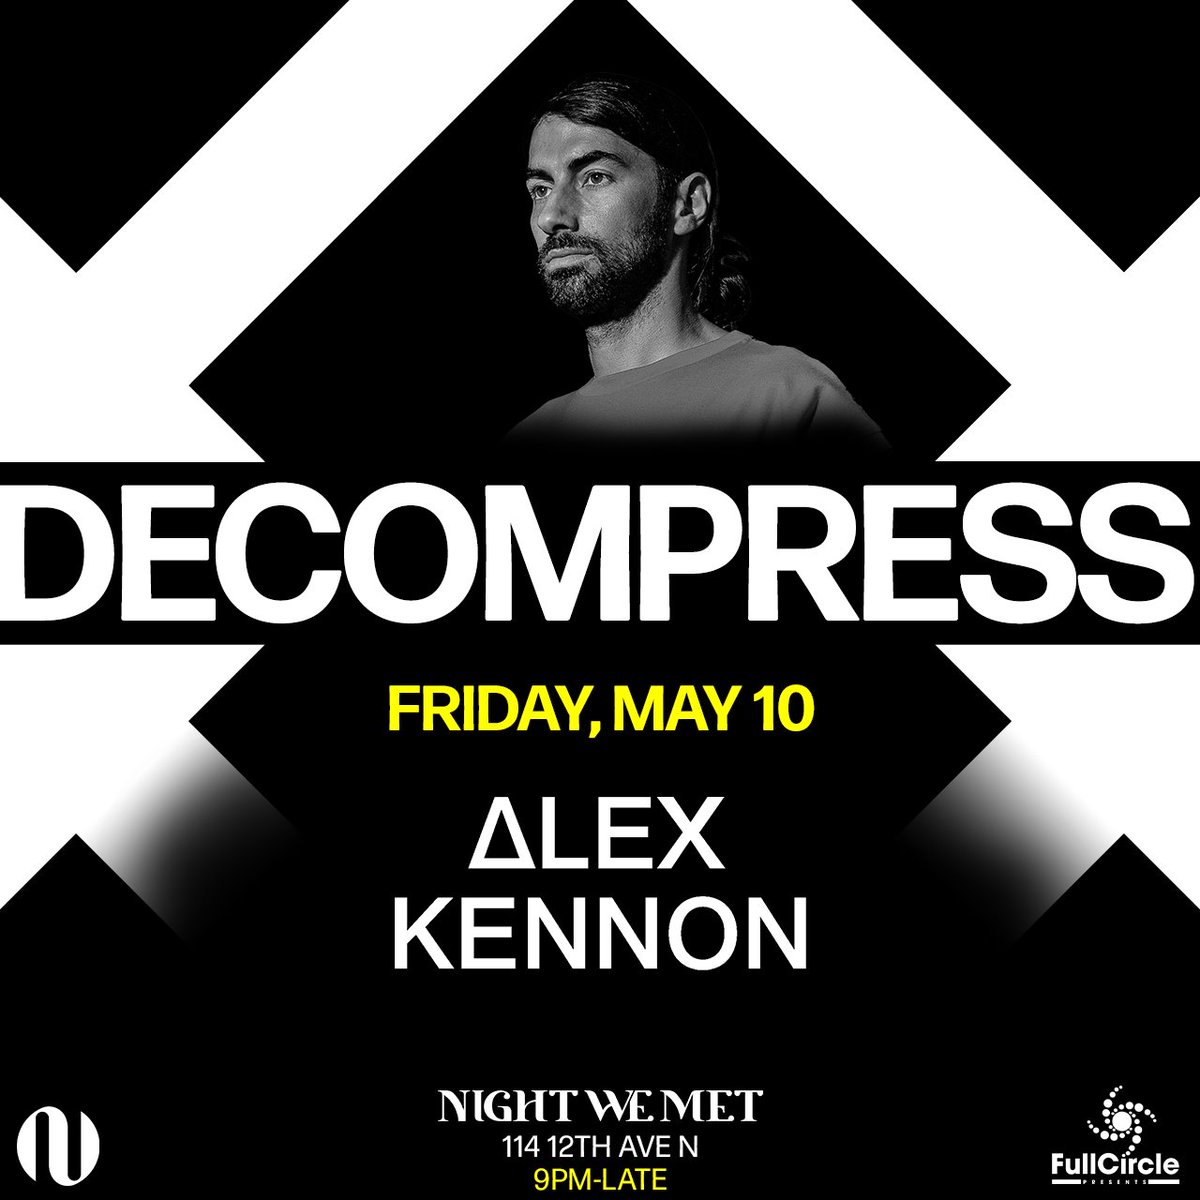 House music never gets old... Decompress ft. @AlexKennon is taking over Night We Met on 5/10 🏁 Grab yo tix - link.dice.fm/d0f7f2bedb42